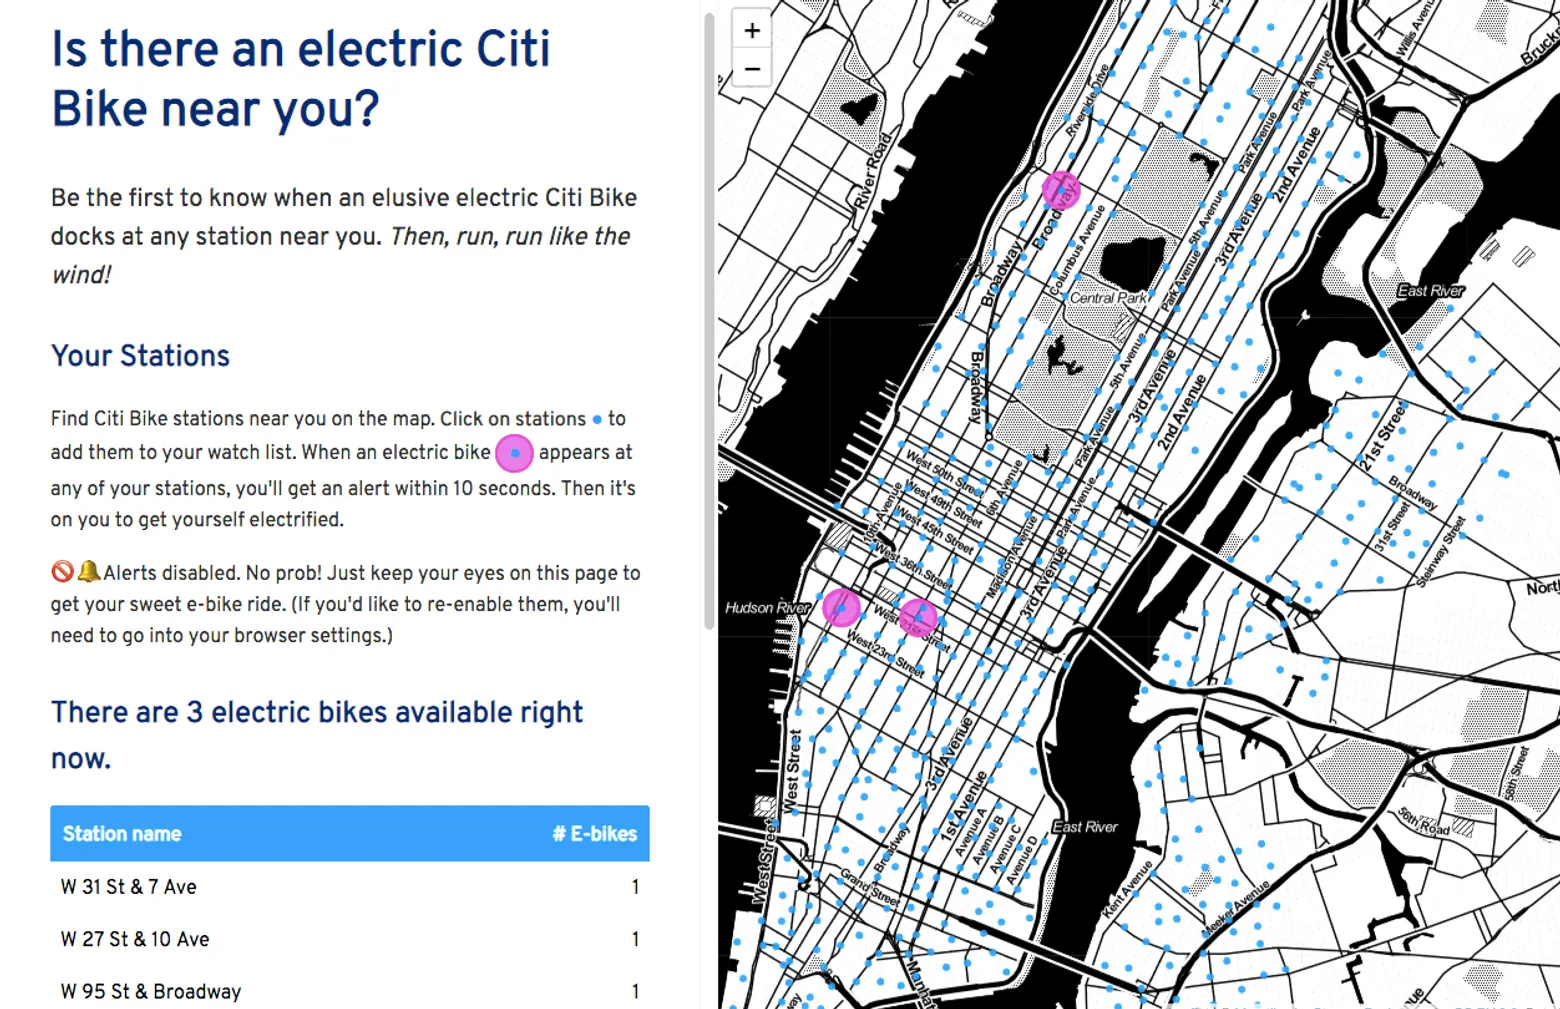 Find one of those elusive electric Citi Bikes with this interactive map